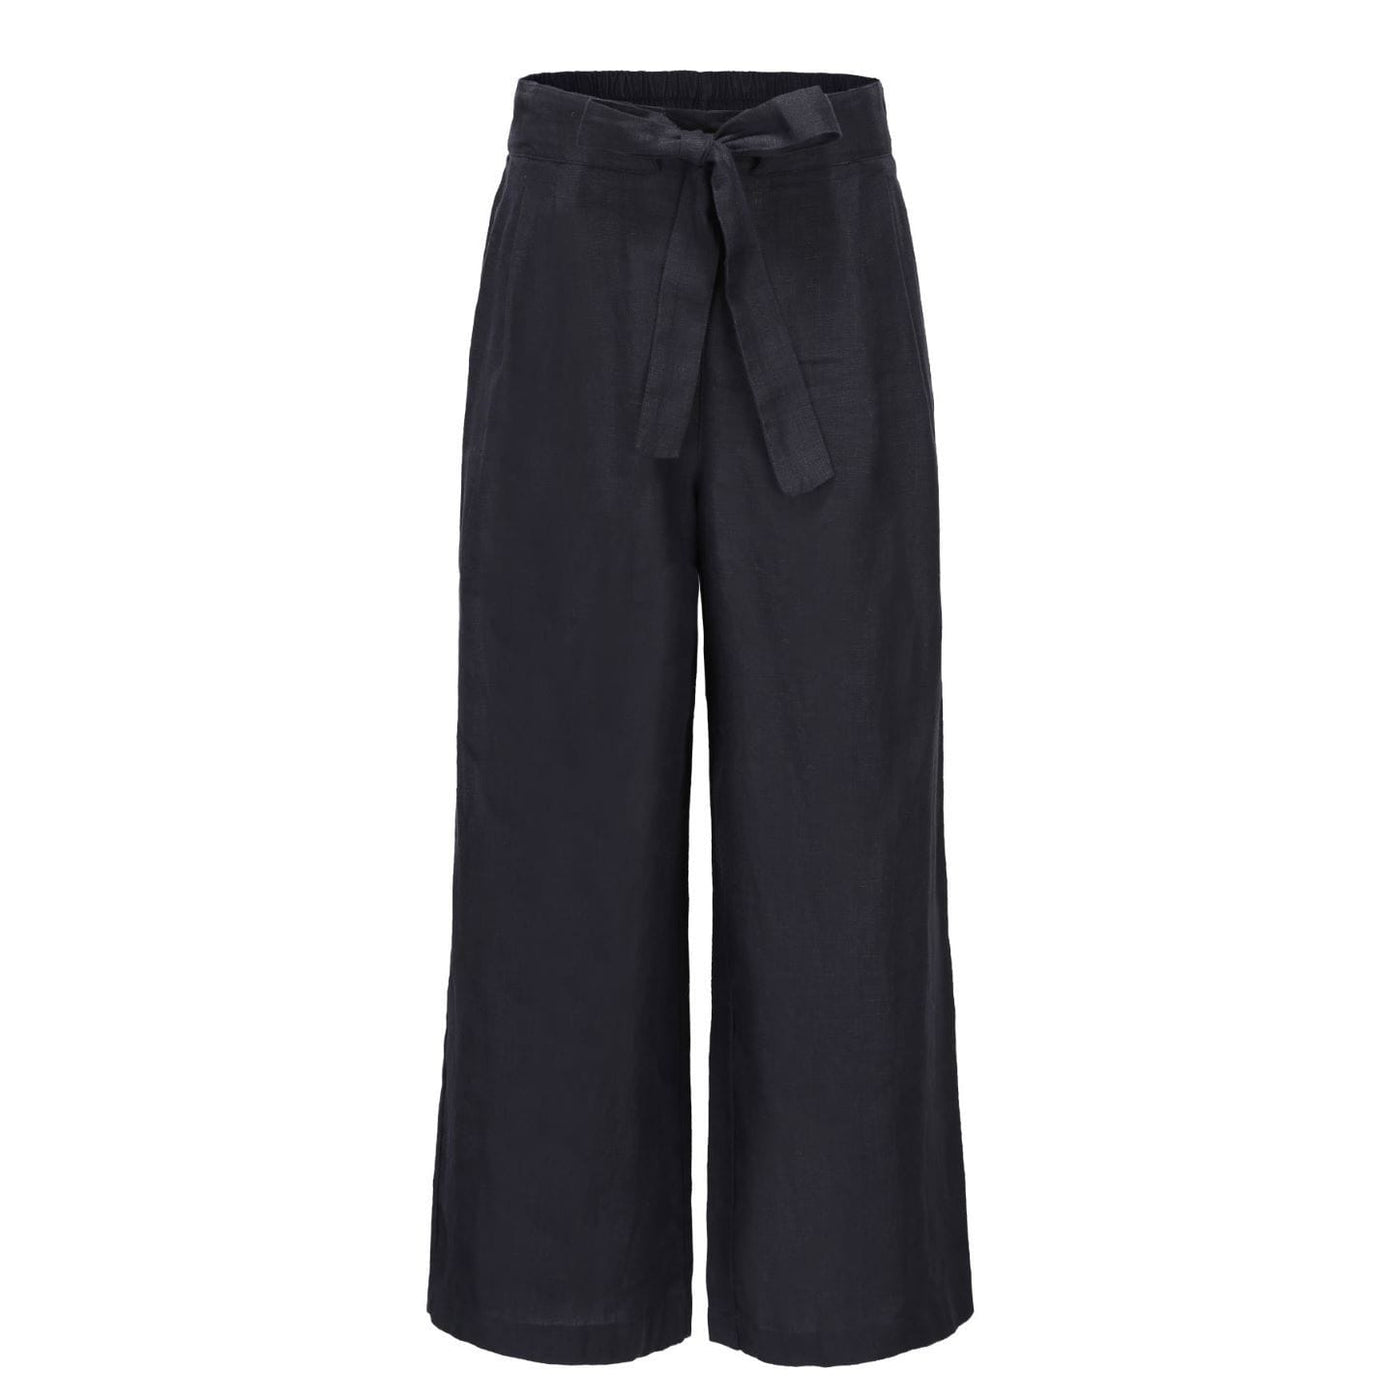 LILLY PILLY Collection 100% organic linen Ava Pants in Navy as 3D image showing front view